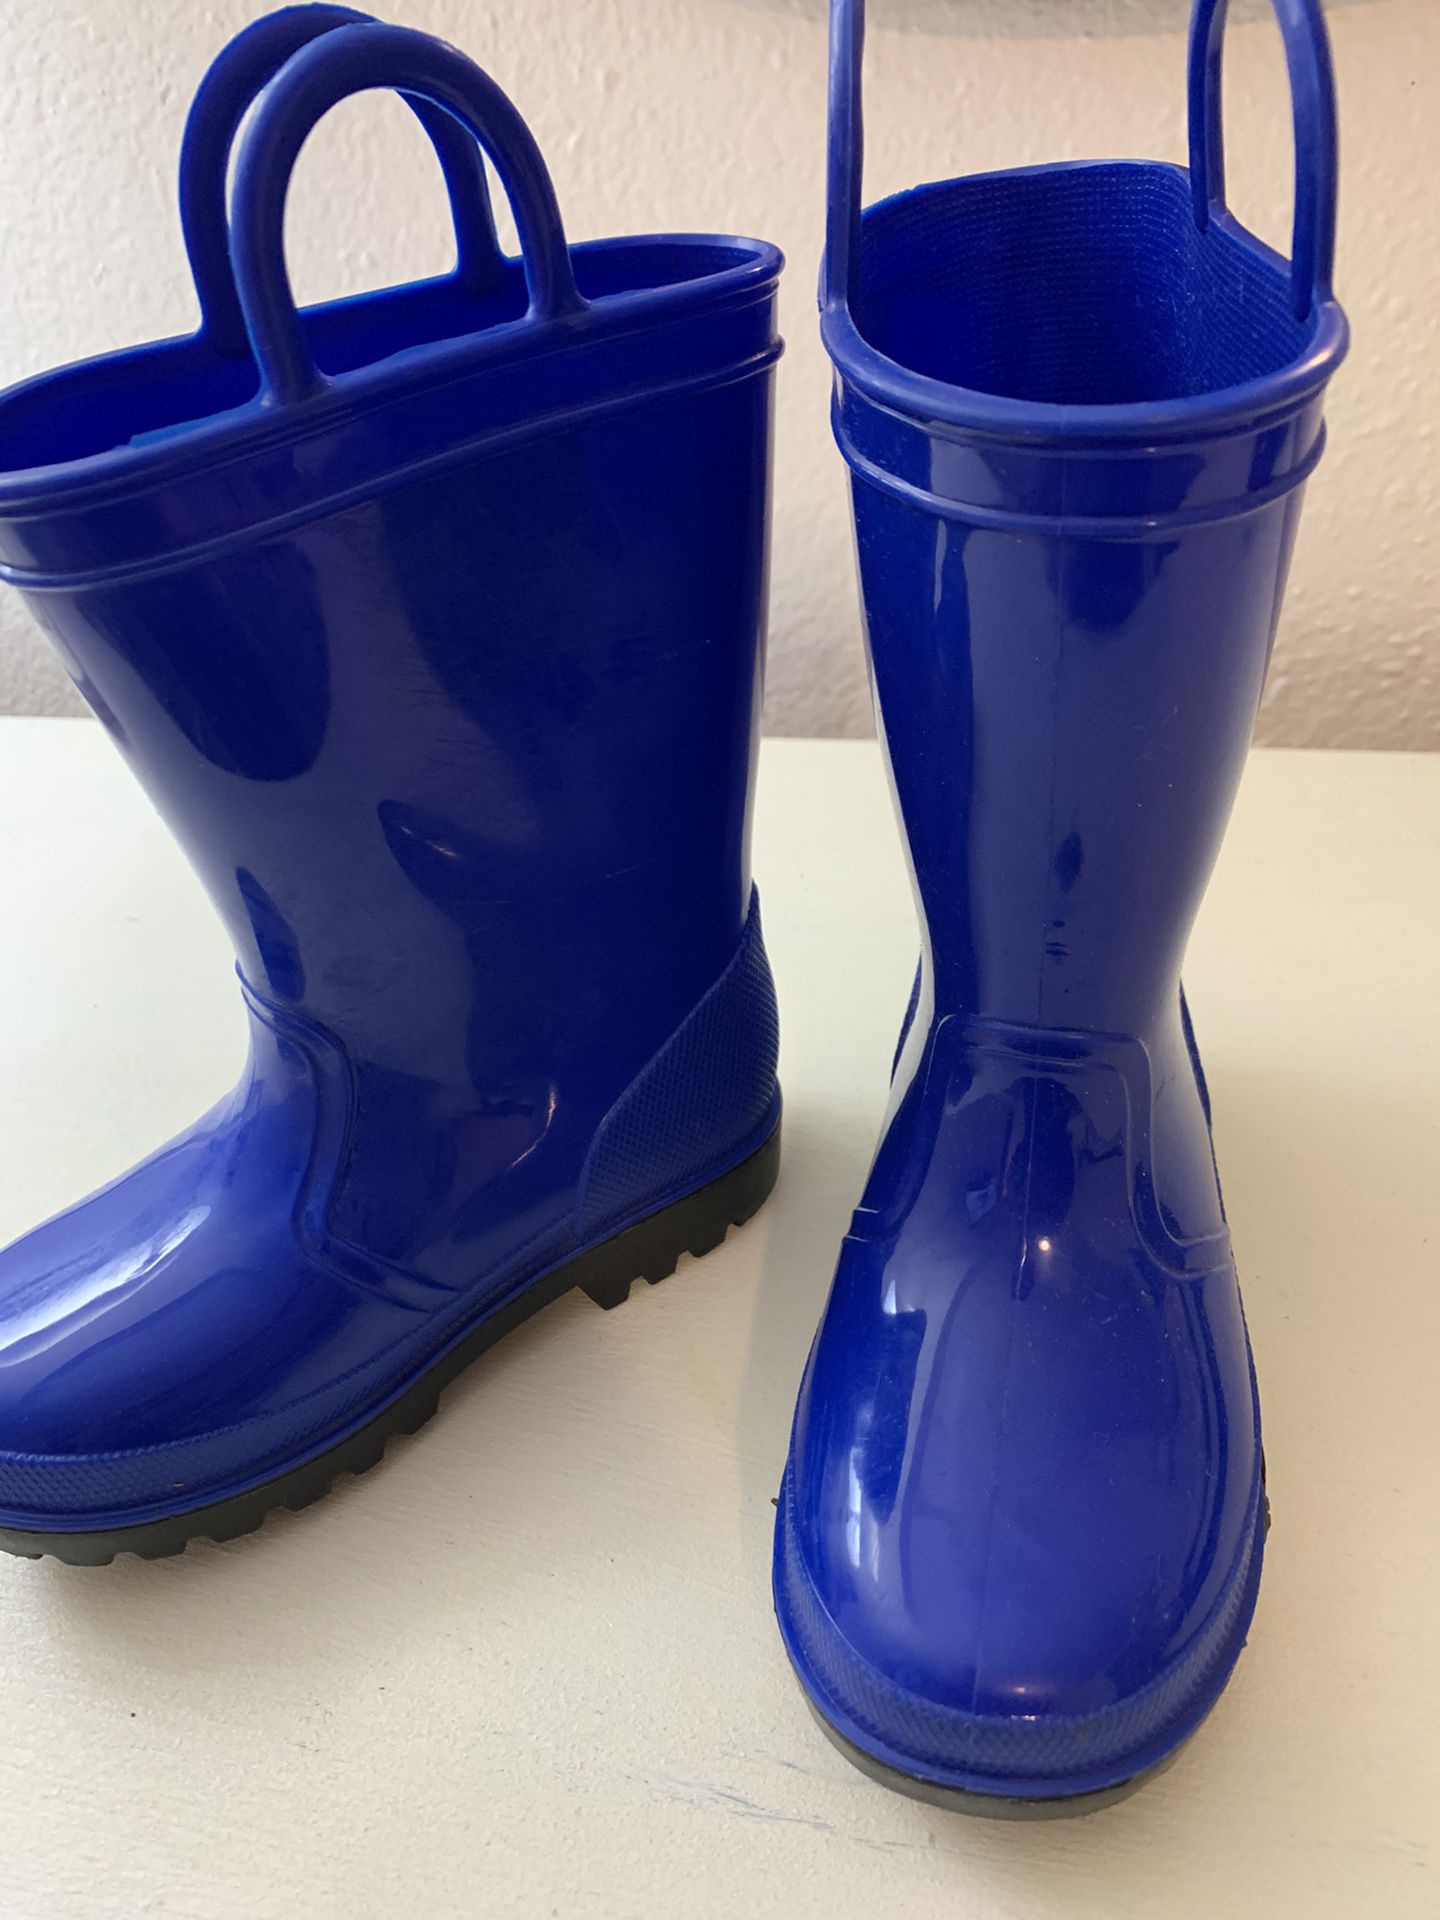 Toddler Rain Boots Like New Size 8